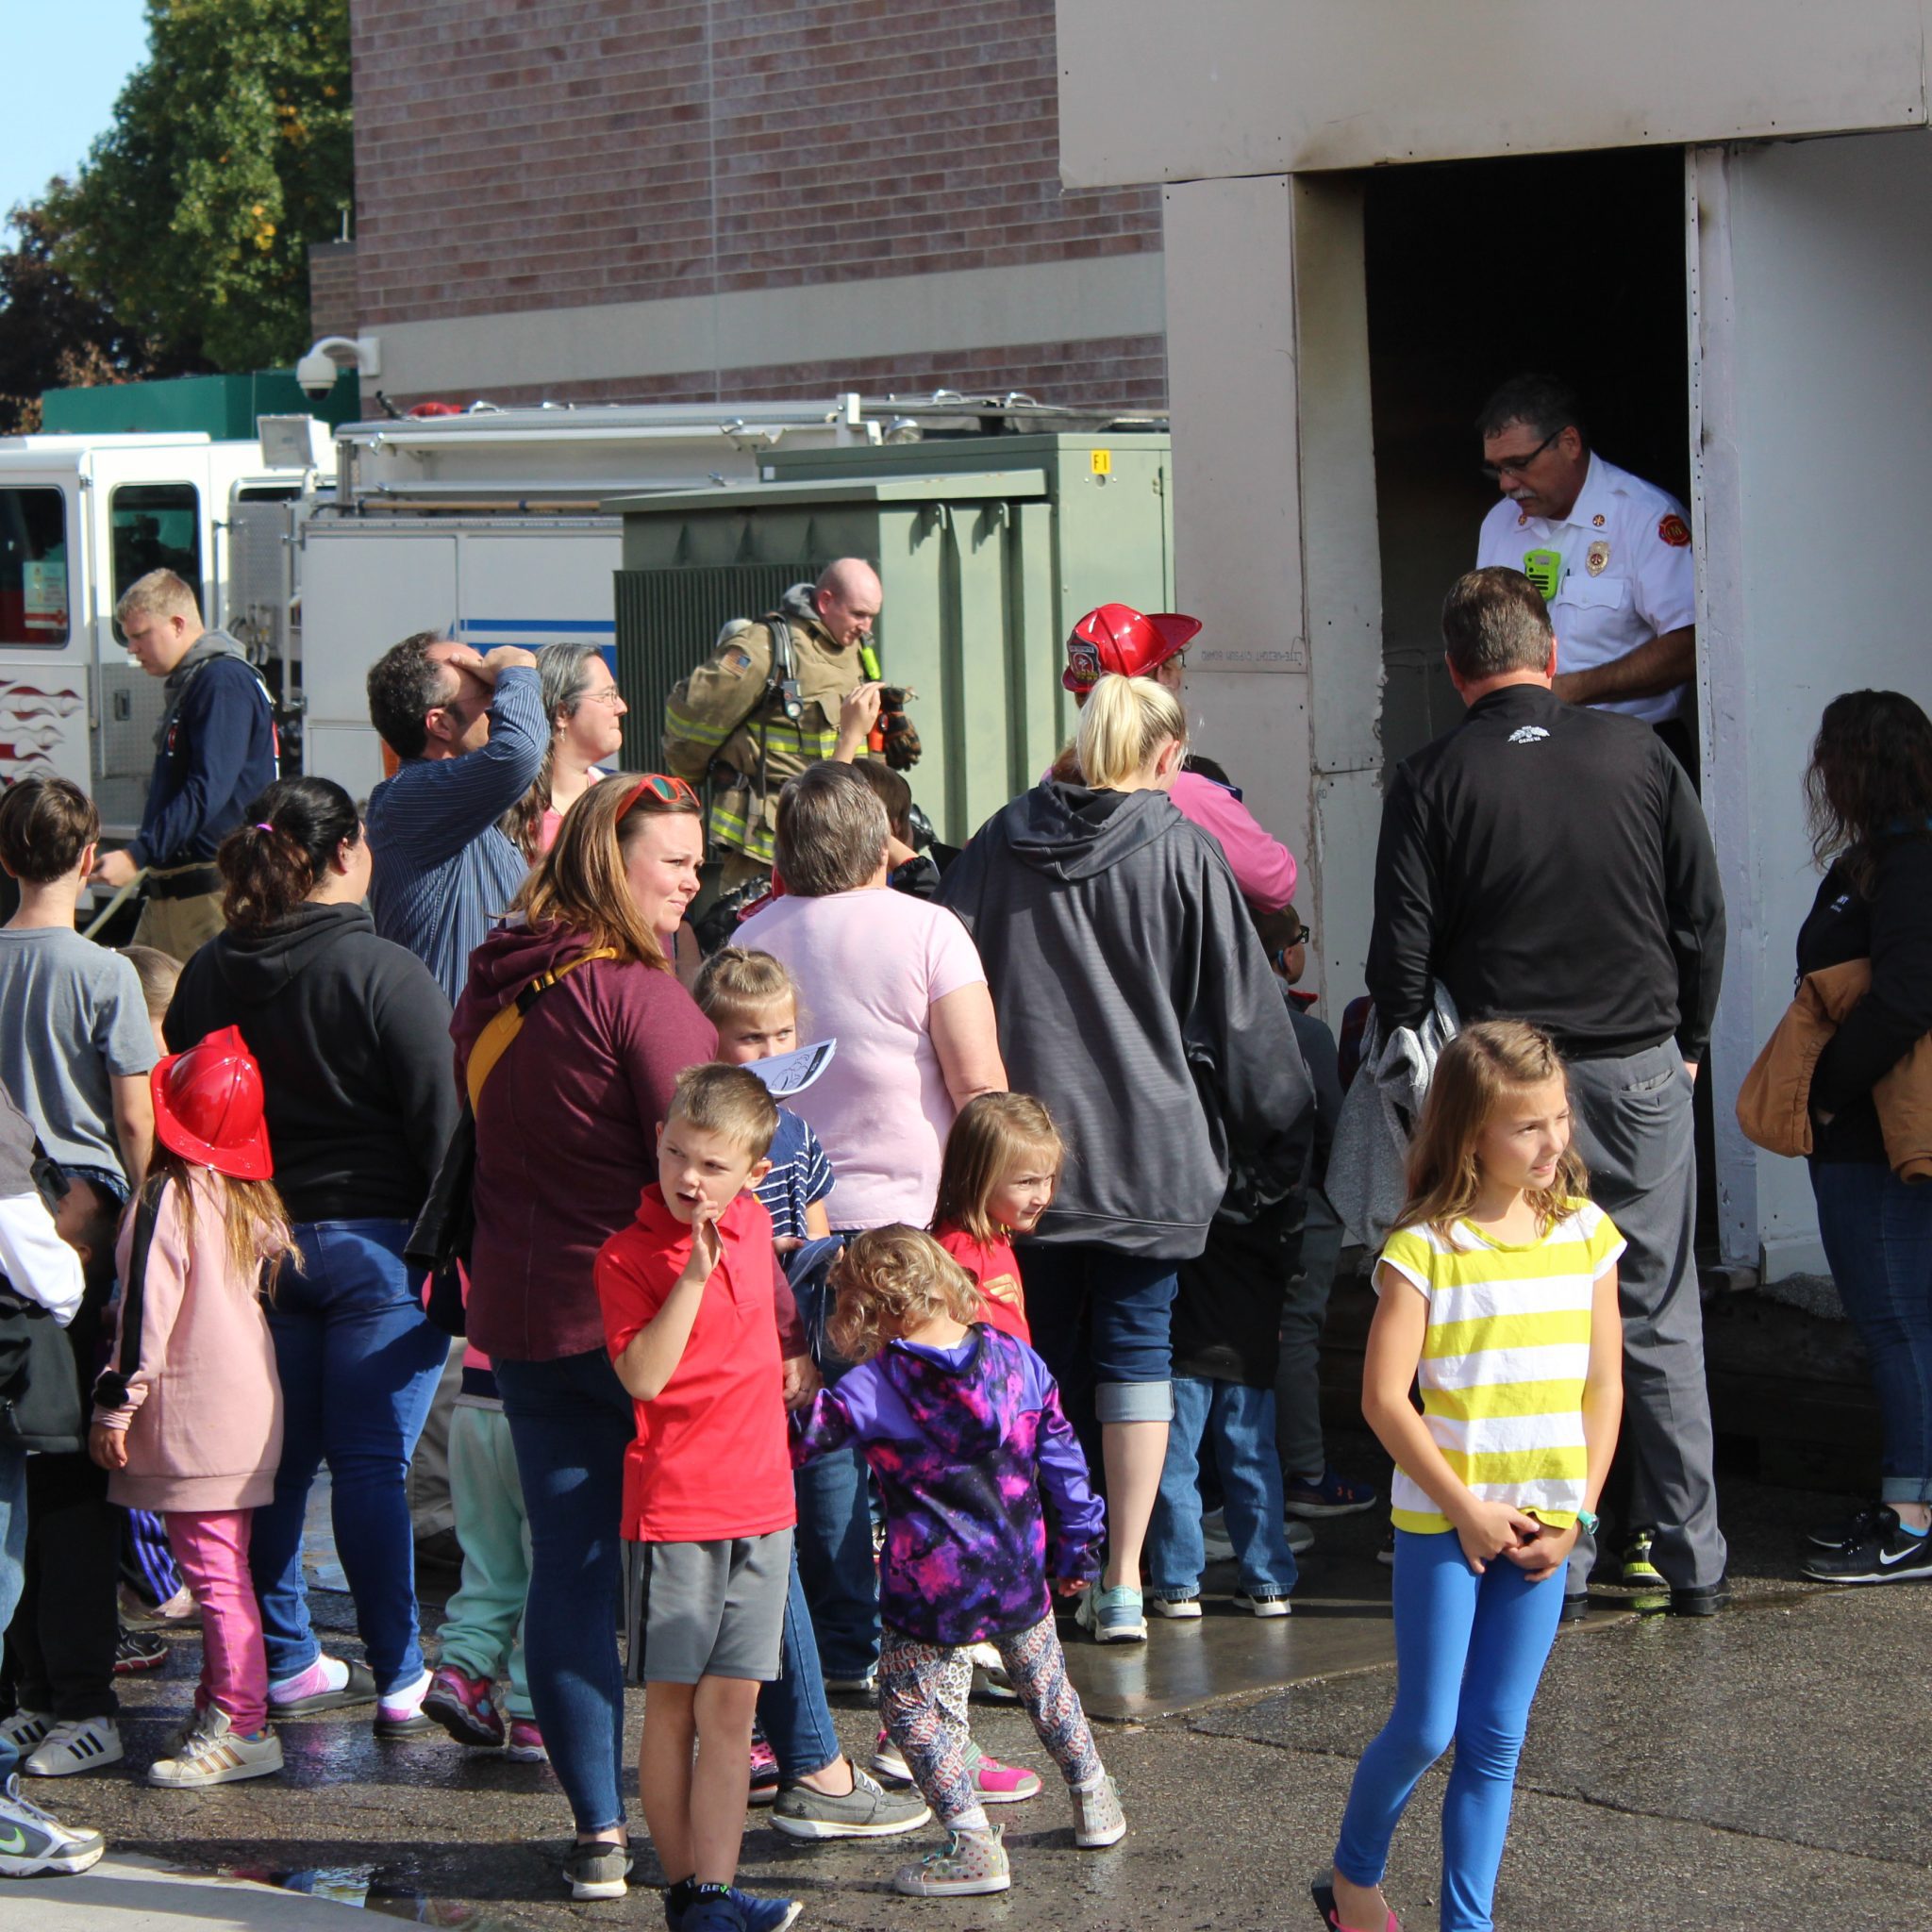 Mark your calendars: Public Safety Open House October 3